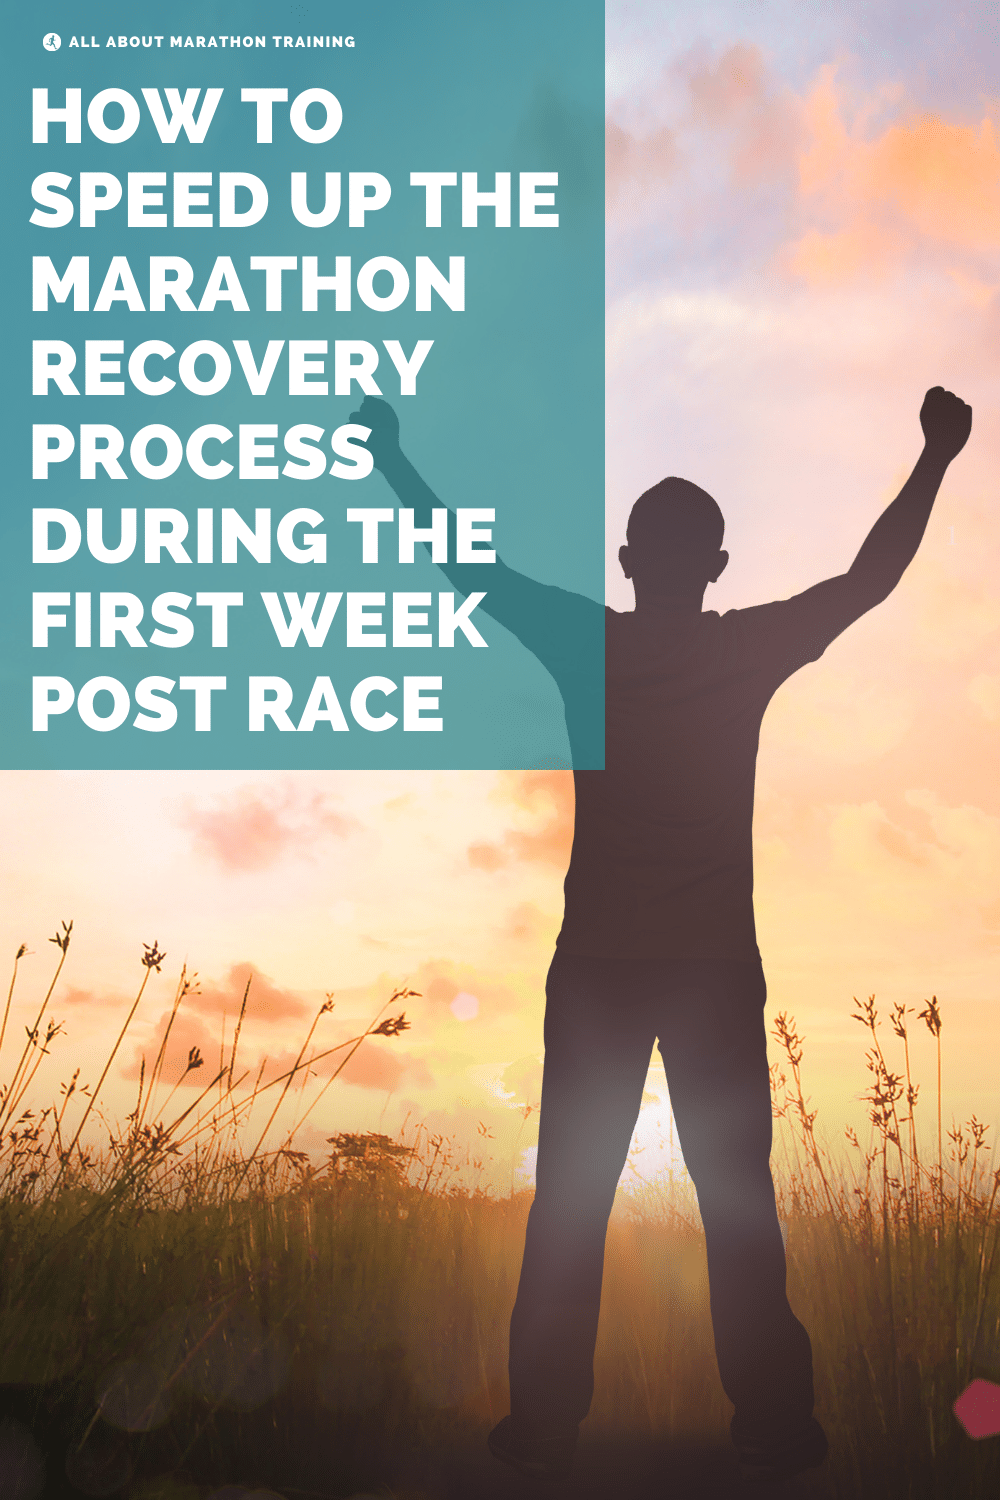 Marathon Recovery How to Speed Up the Process